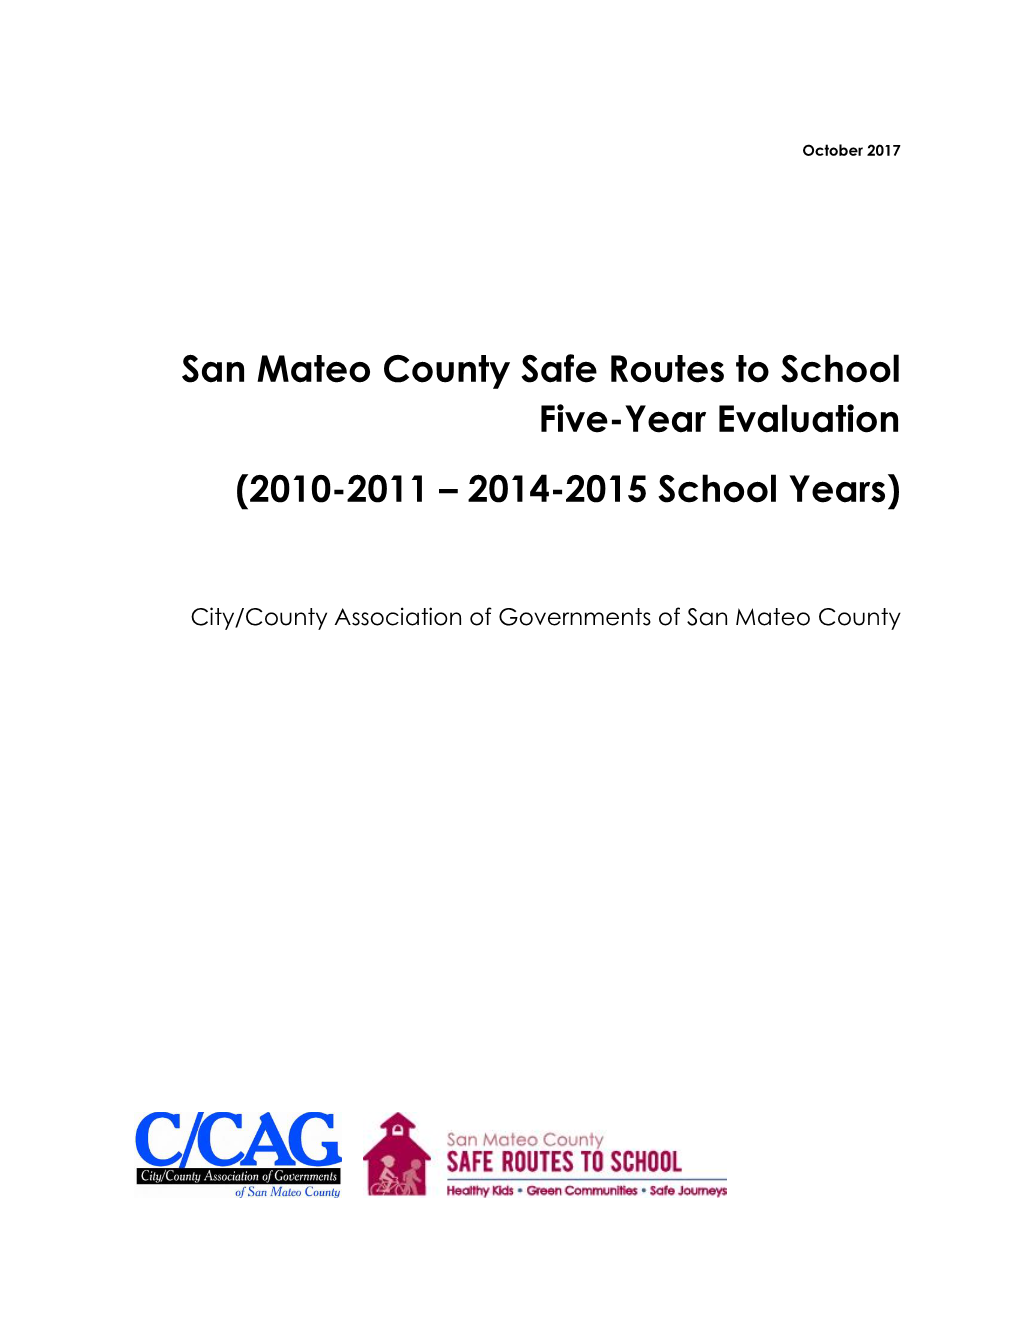 San Mateo County Safe Routes to School Five-Year Evaluation (2010-2011 – 2014-2015 School Years)